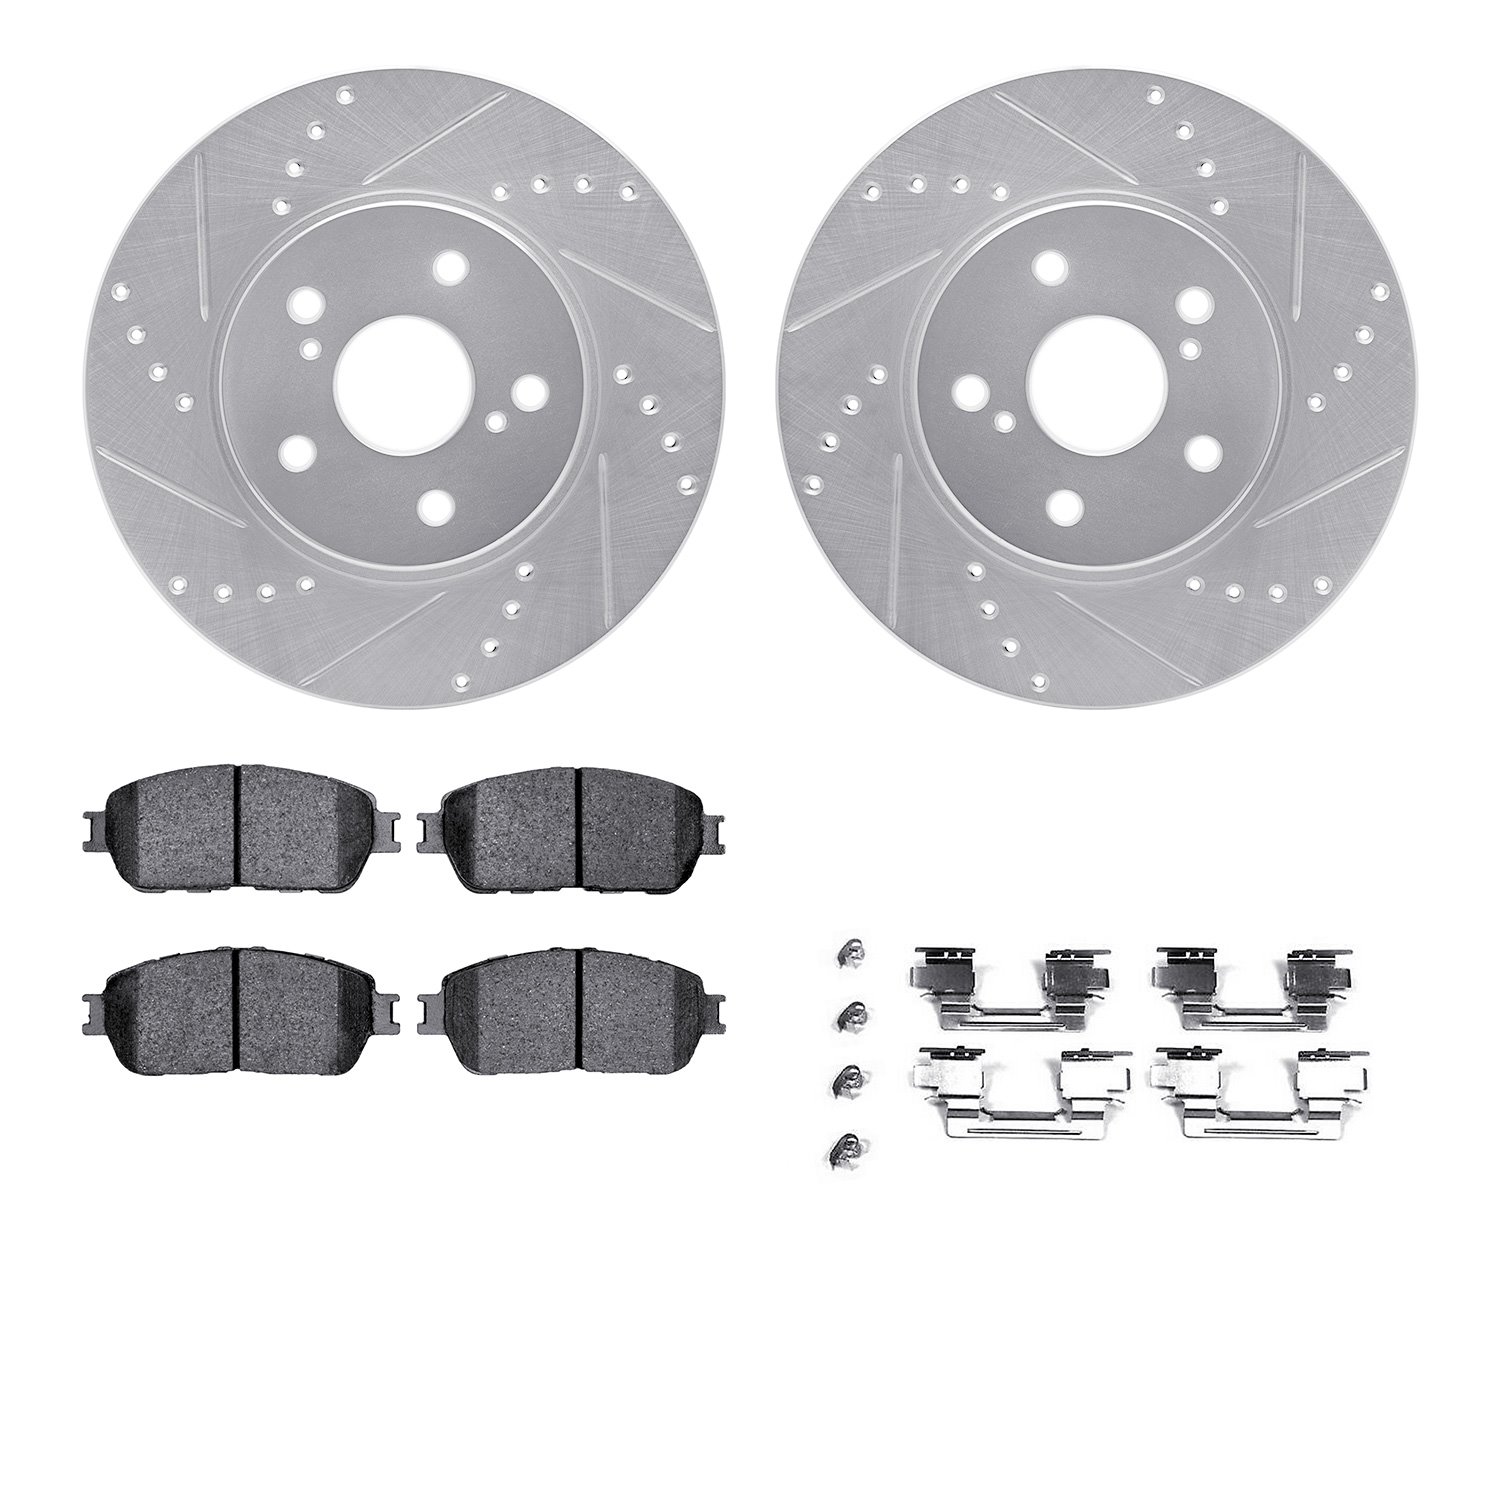 7412-76001 Drilled/Slotted Brake Rotors with Ultimate-Duty Brake Pads Kit & Hardware [Silver], 2004-2010 Lexus/Toyota/Scion, Pos